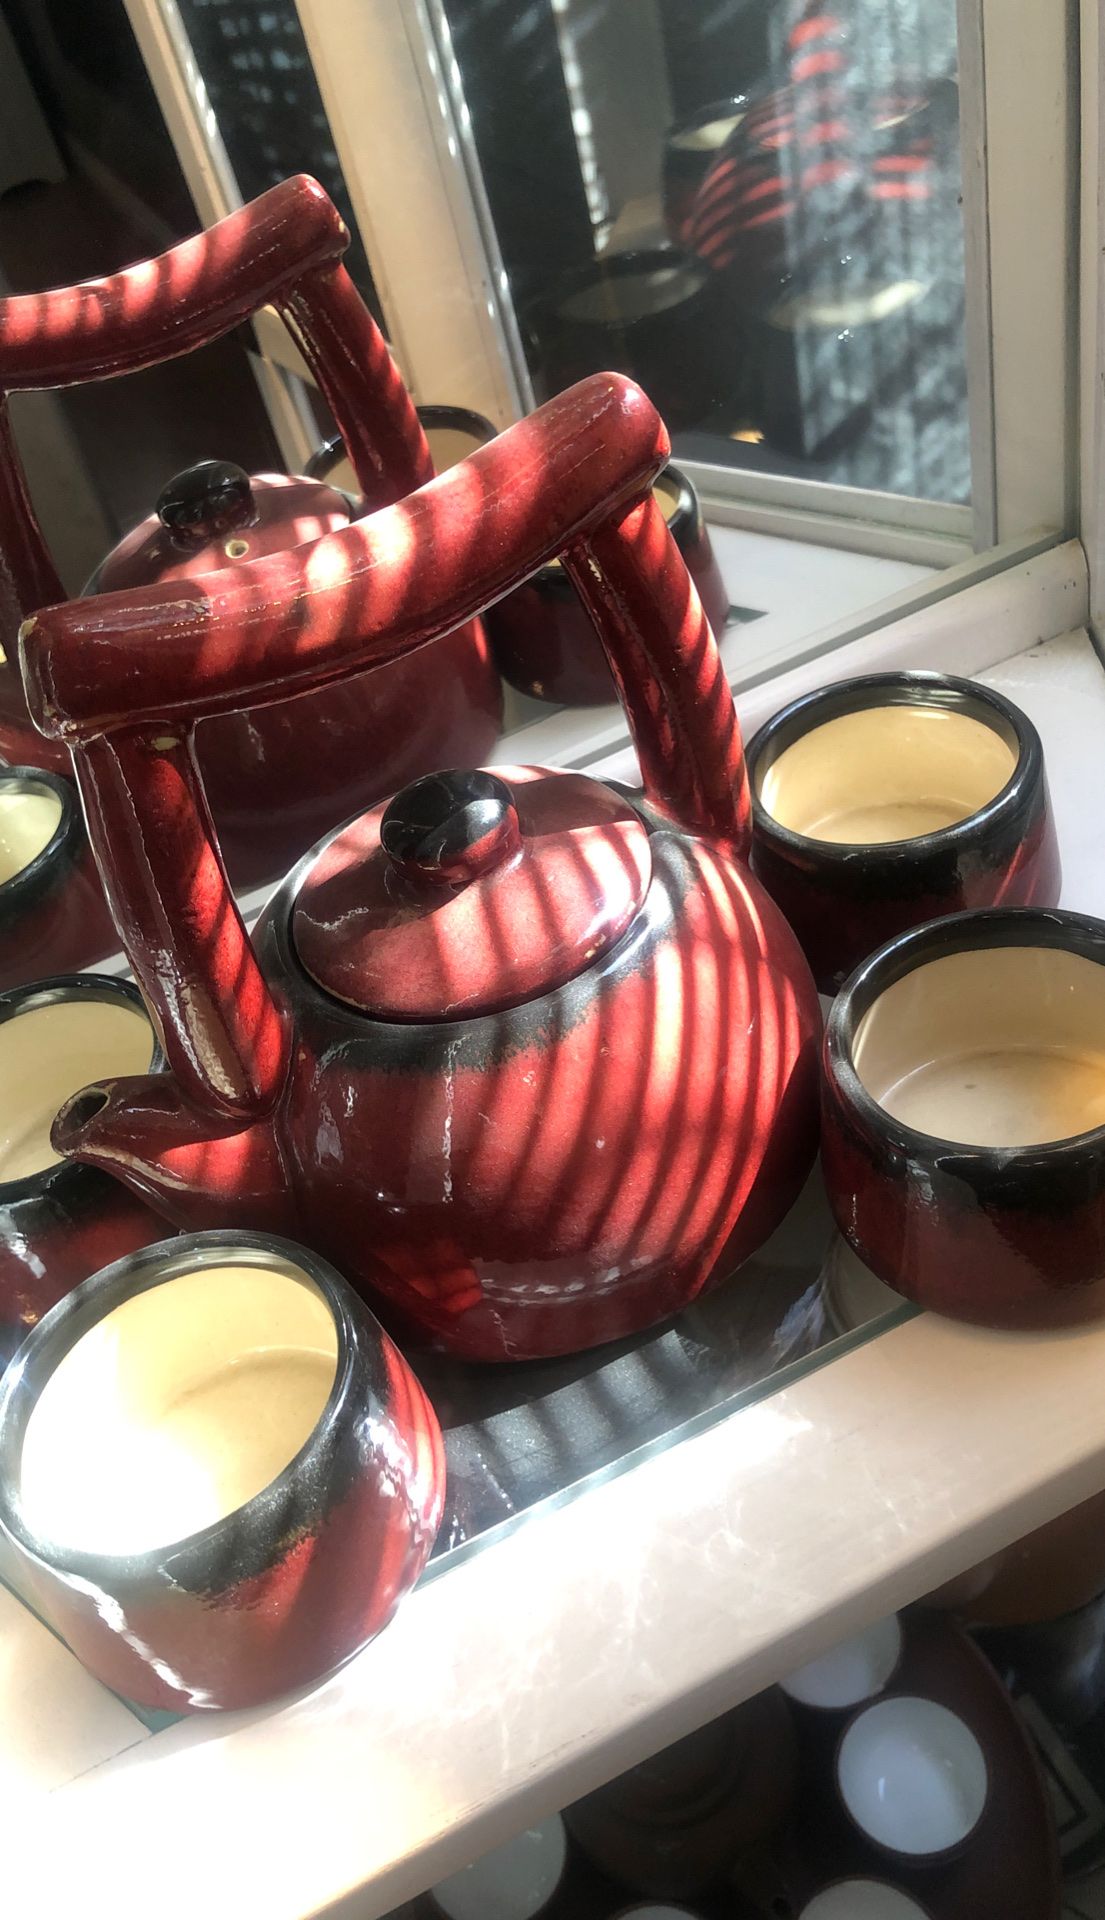 Red Tea Pot with cups from Pier 1 Imports